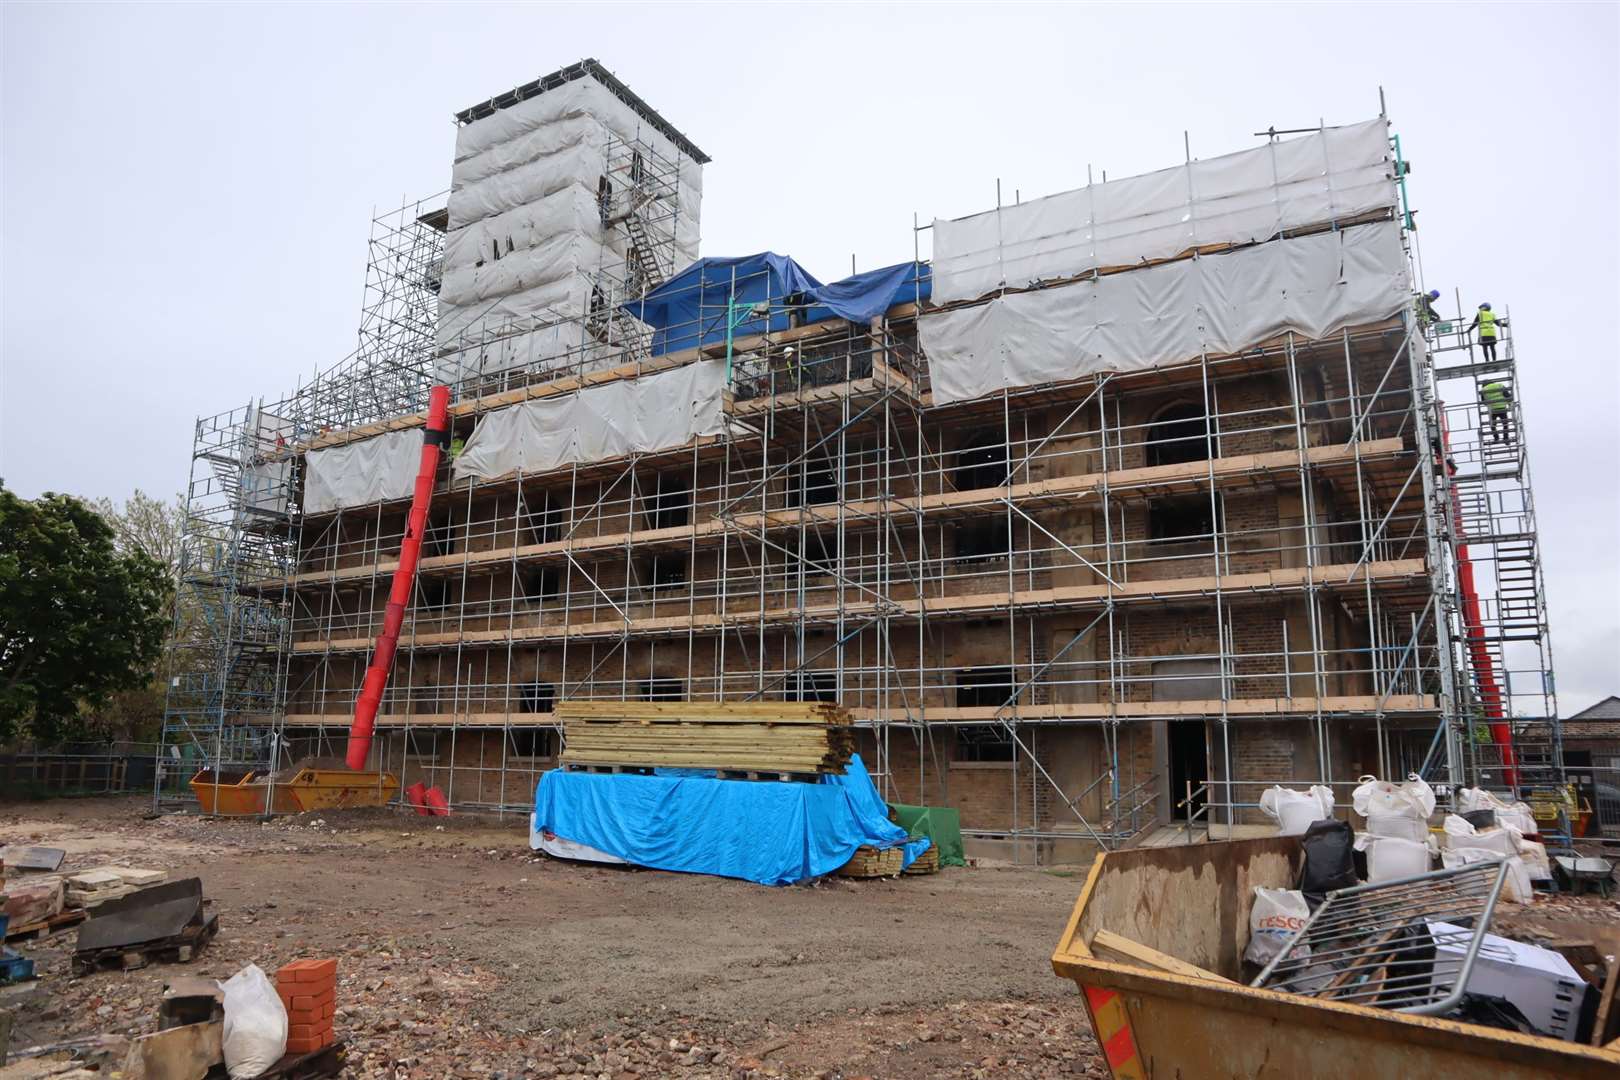 Work on the building at Sheerness Dockyard Church started years ago – it is set to reopen this year. Picture: John Nurden